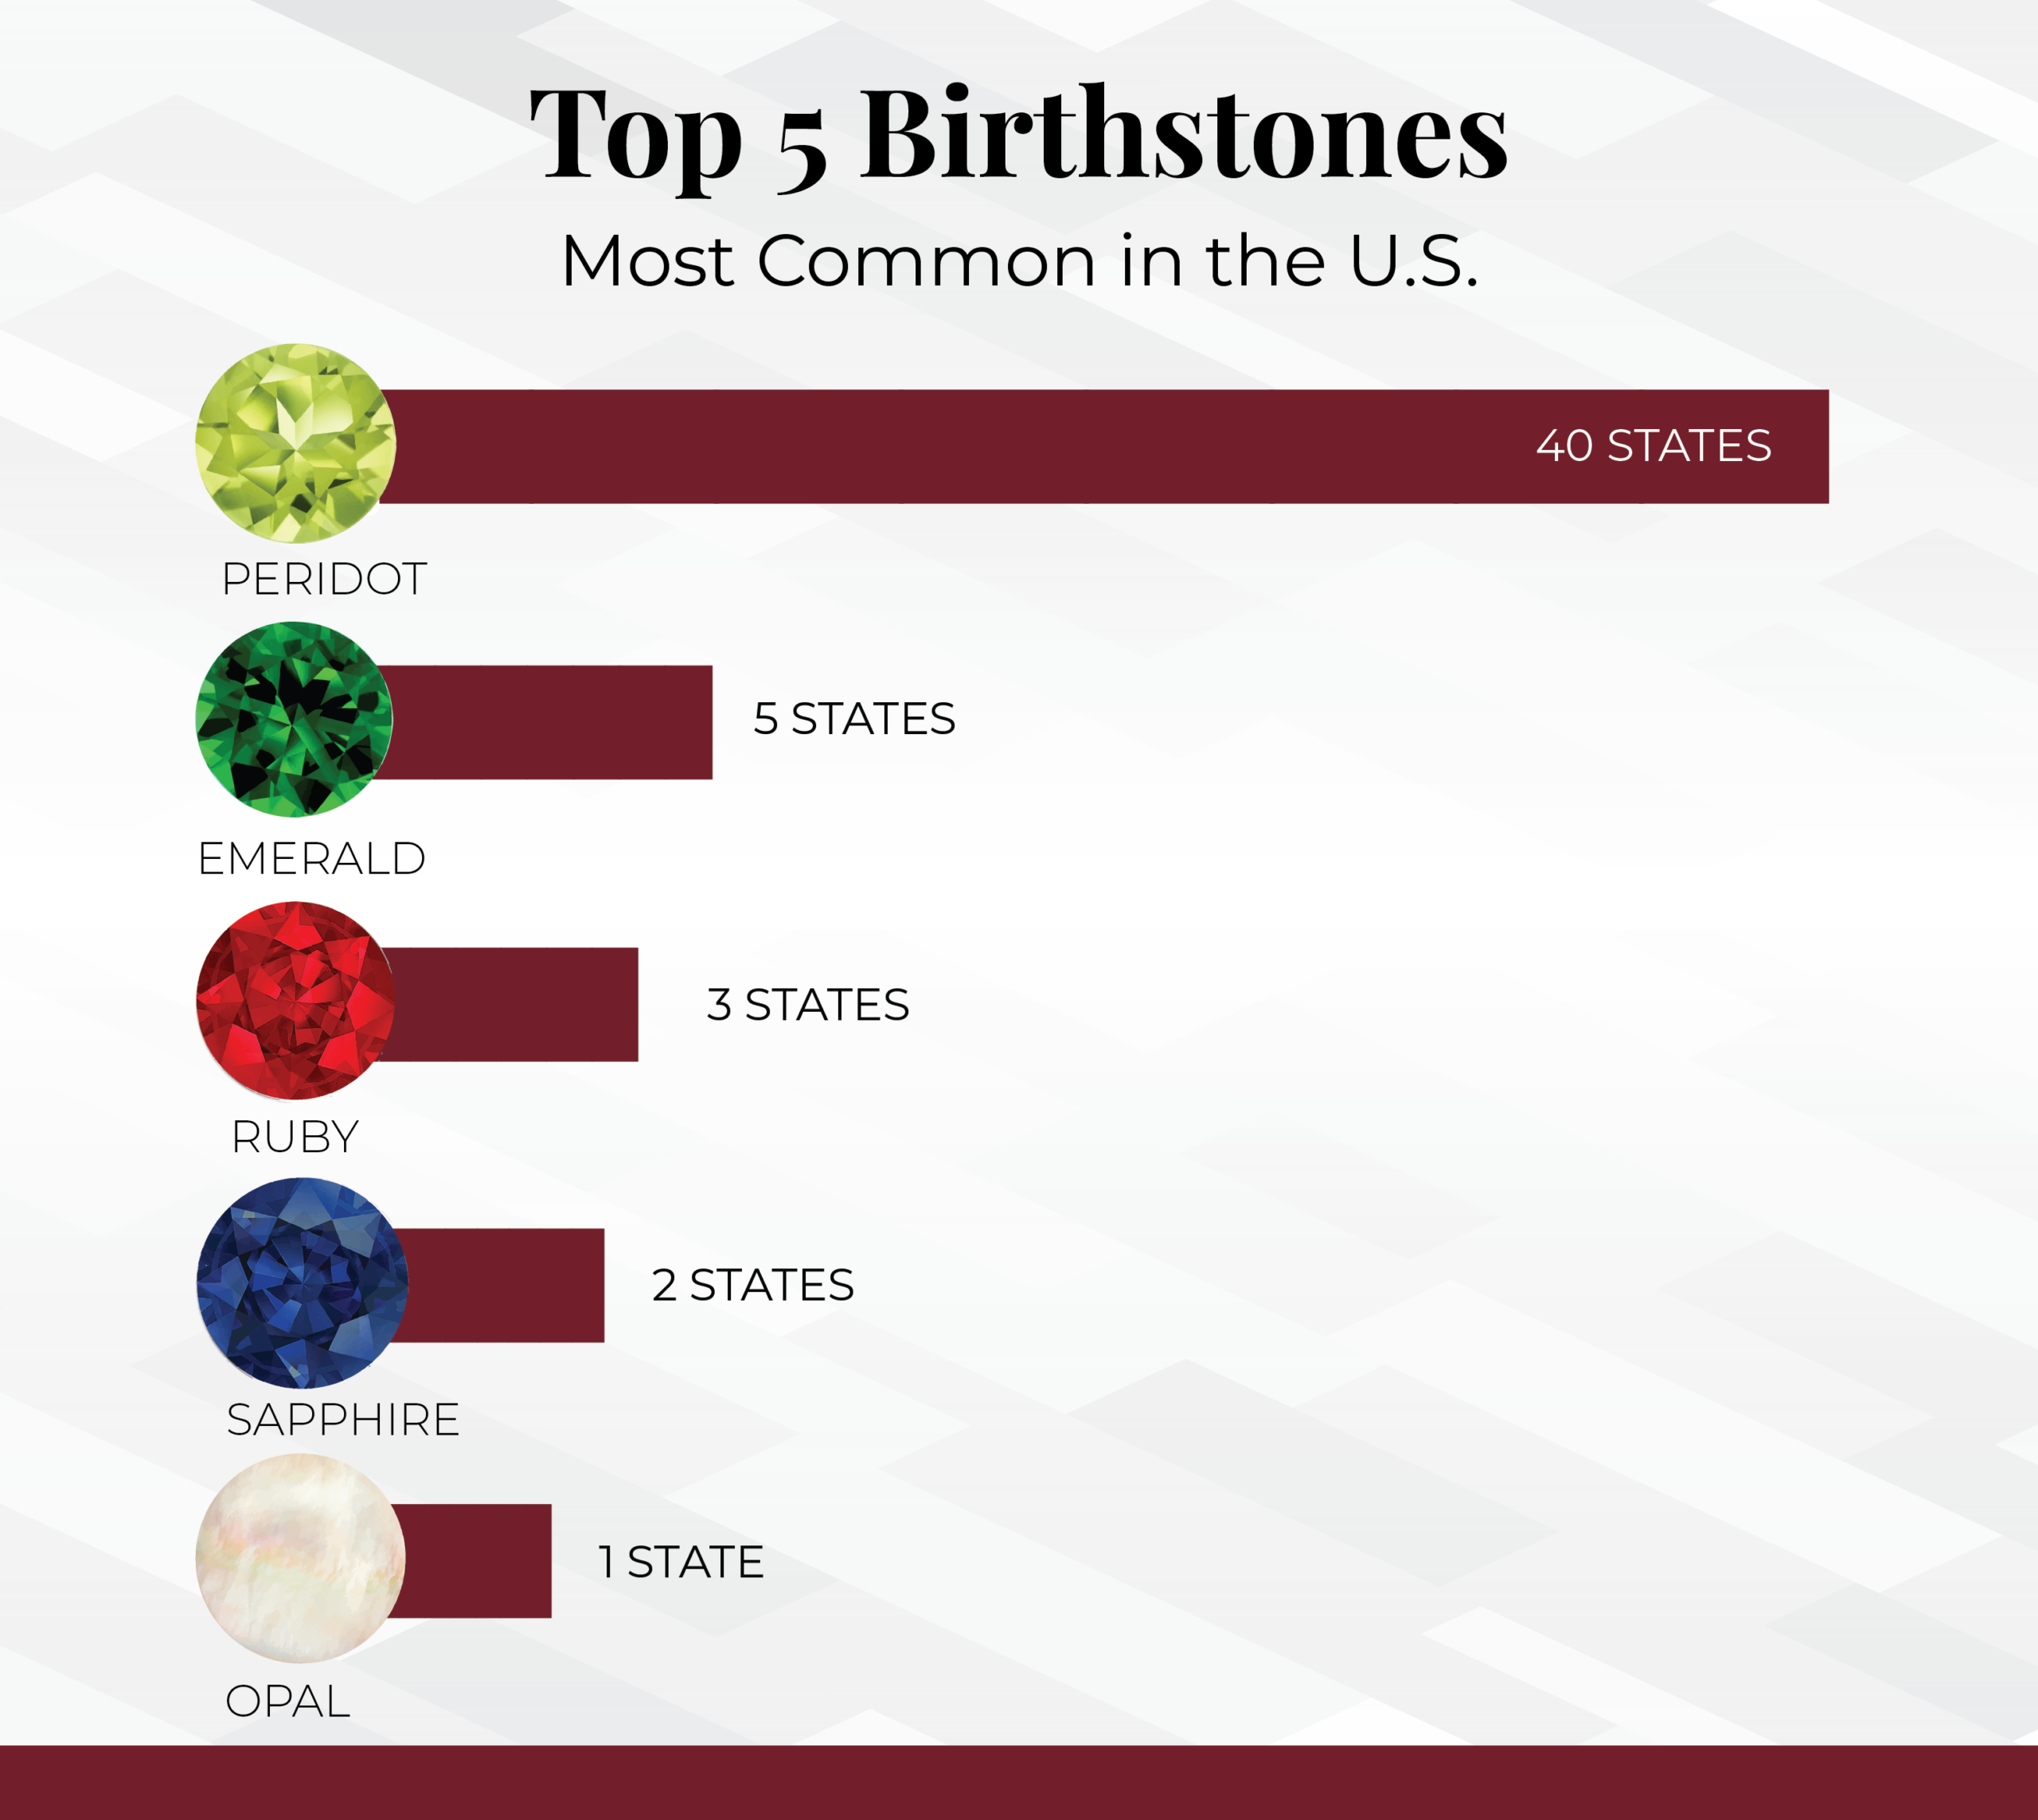 Table showing the most common birthstones in the U.S.